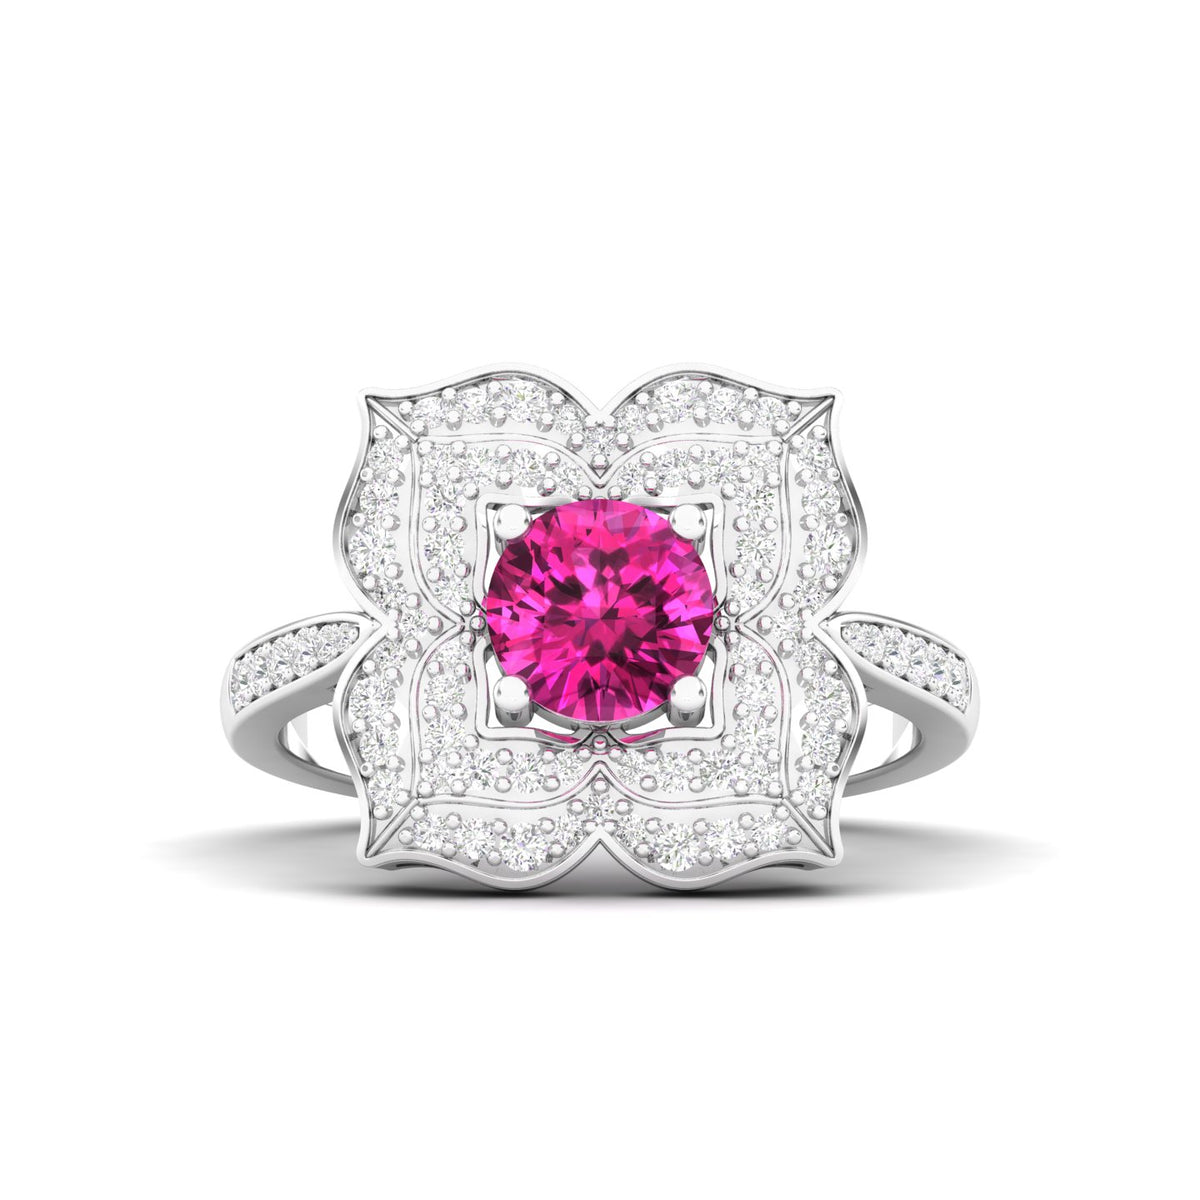 Maurya Solitaire Pink Amethyst Pompon Ring with Accent Diamonds